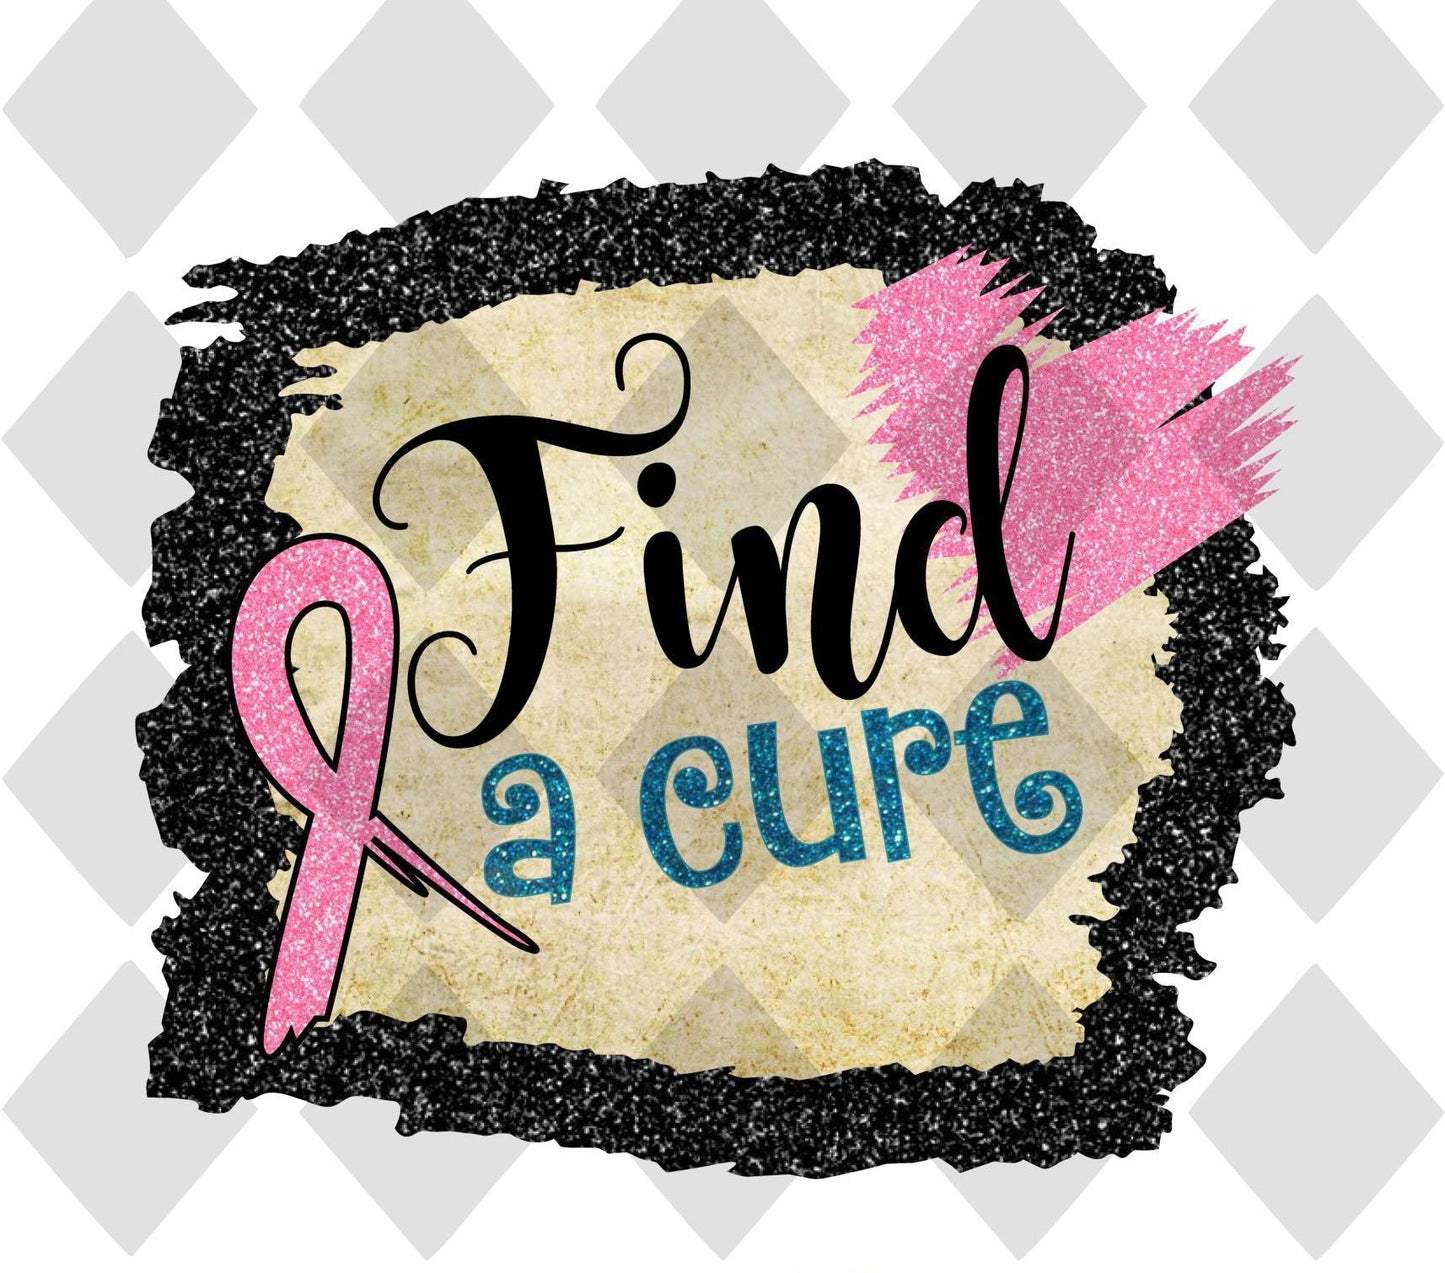 Find A Cure October DTF TRANSFERPRINT TO ORDER